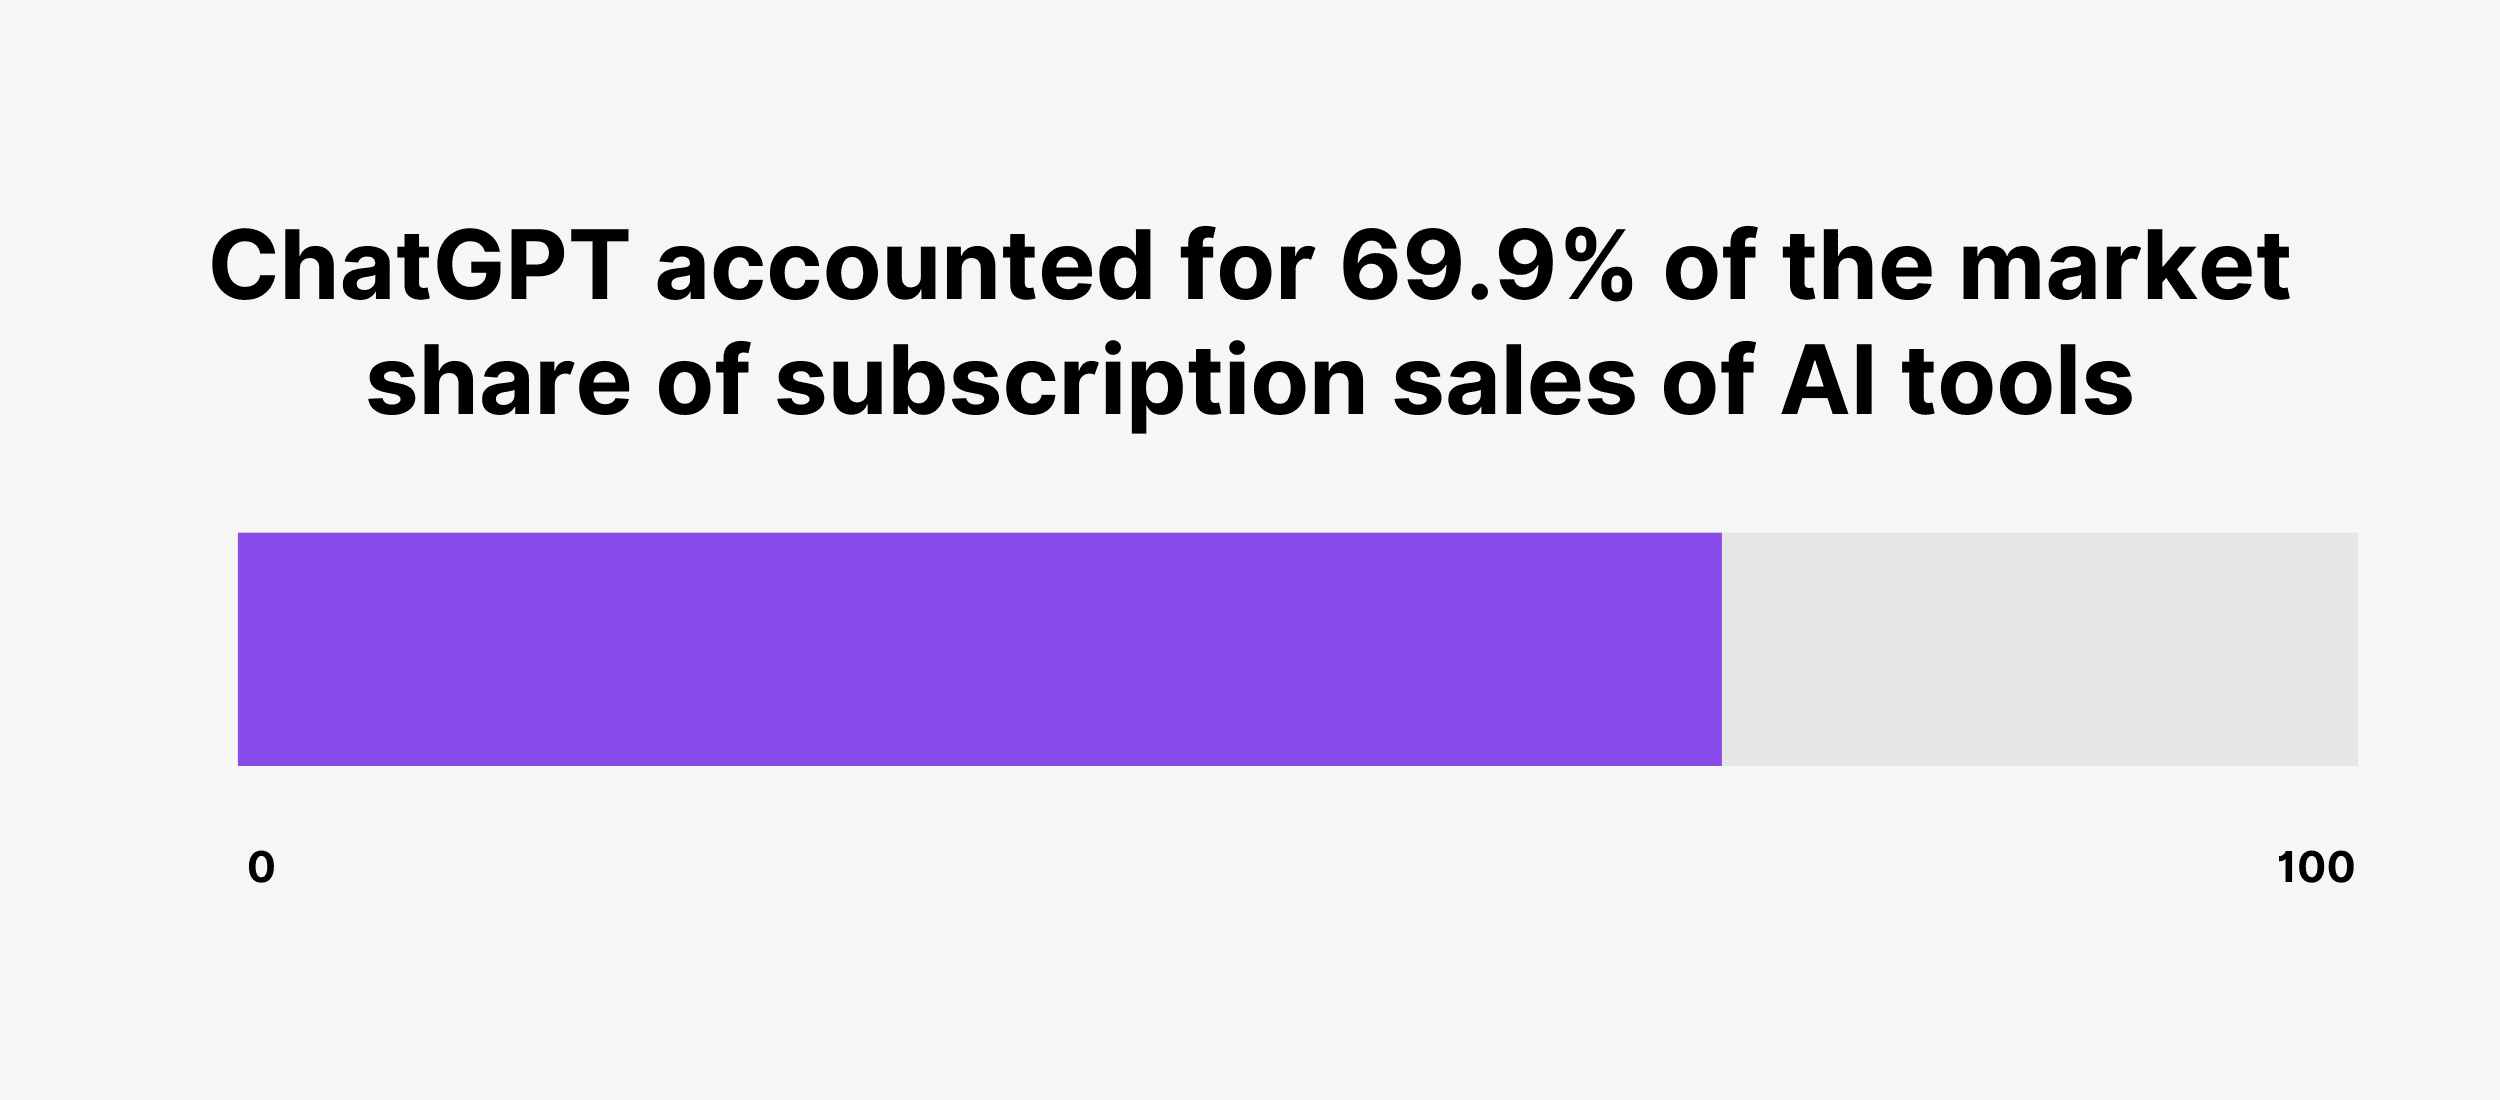 ChatGPT accounted for 69.9% of the market share of subscription sales of AI tools